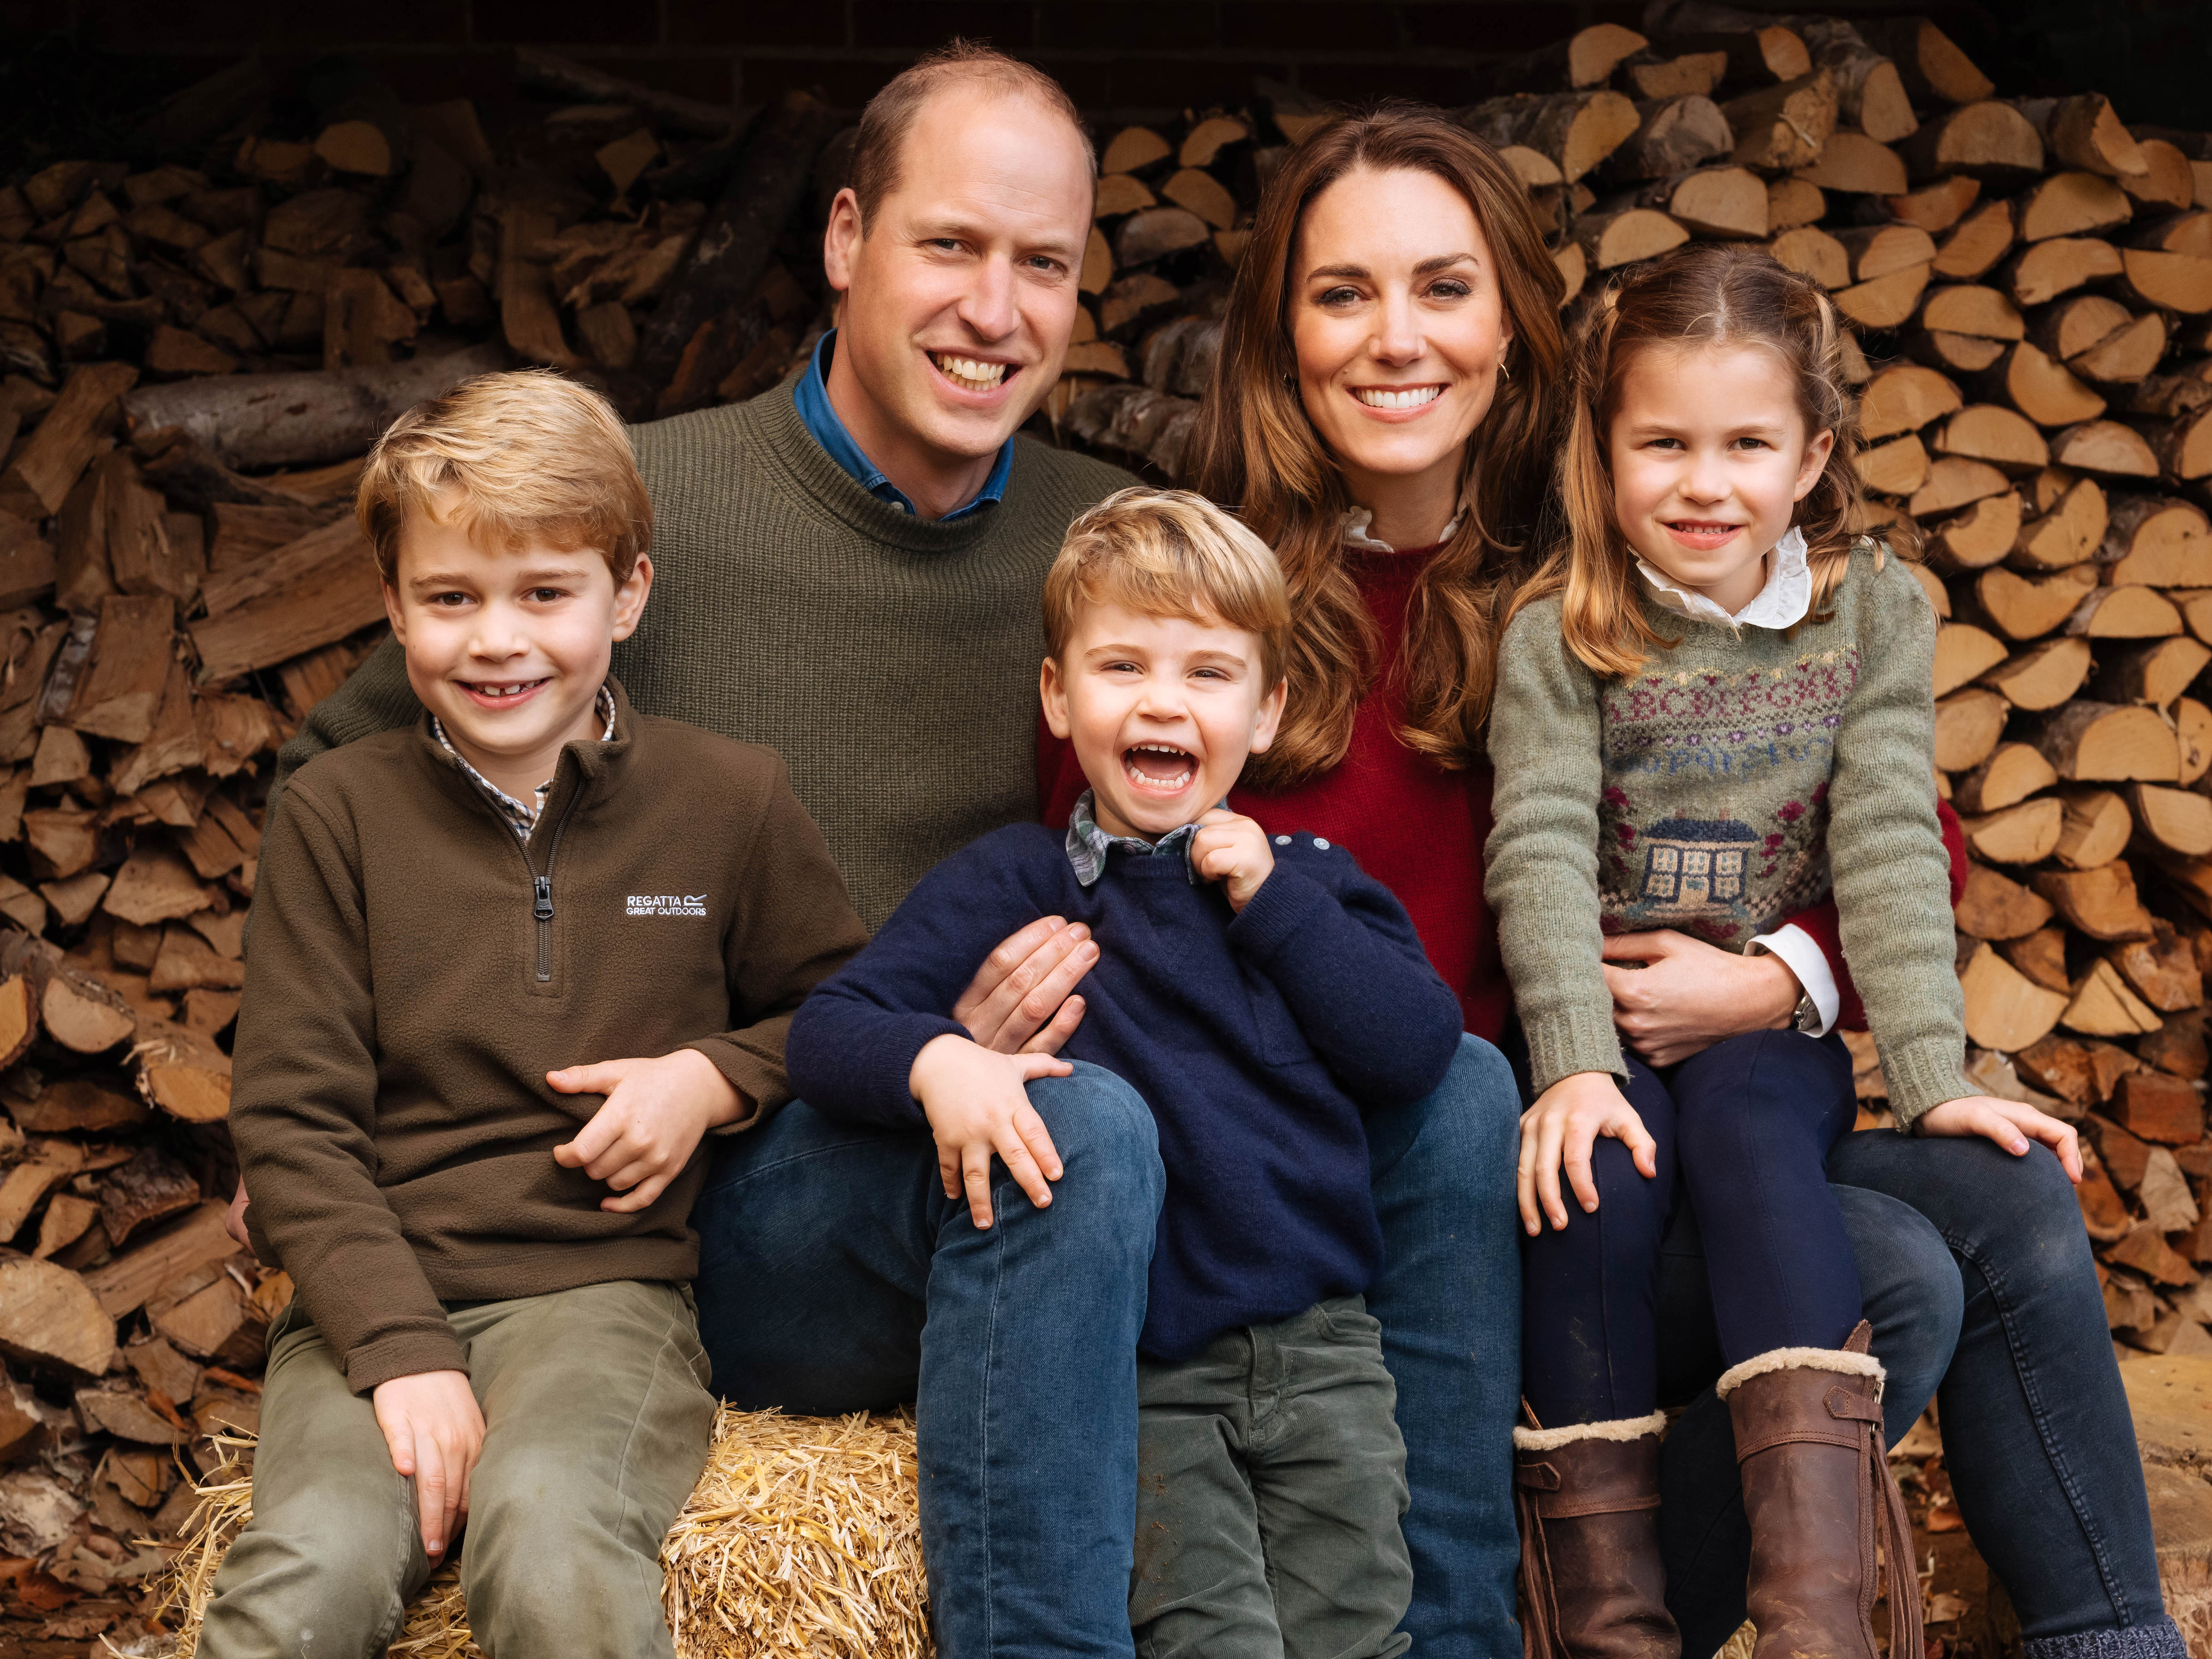 Royal family photo leaked in 2020 ahead of annual Christmas card